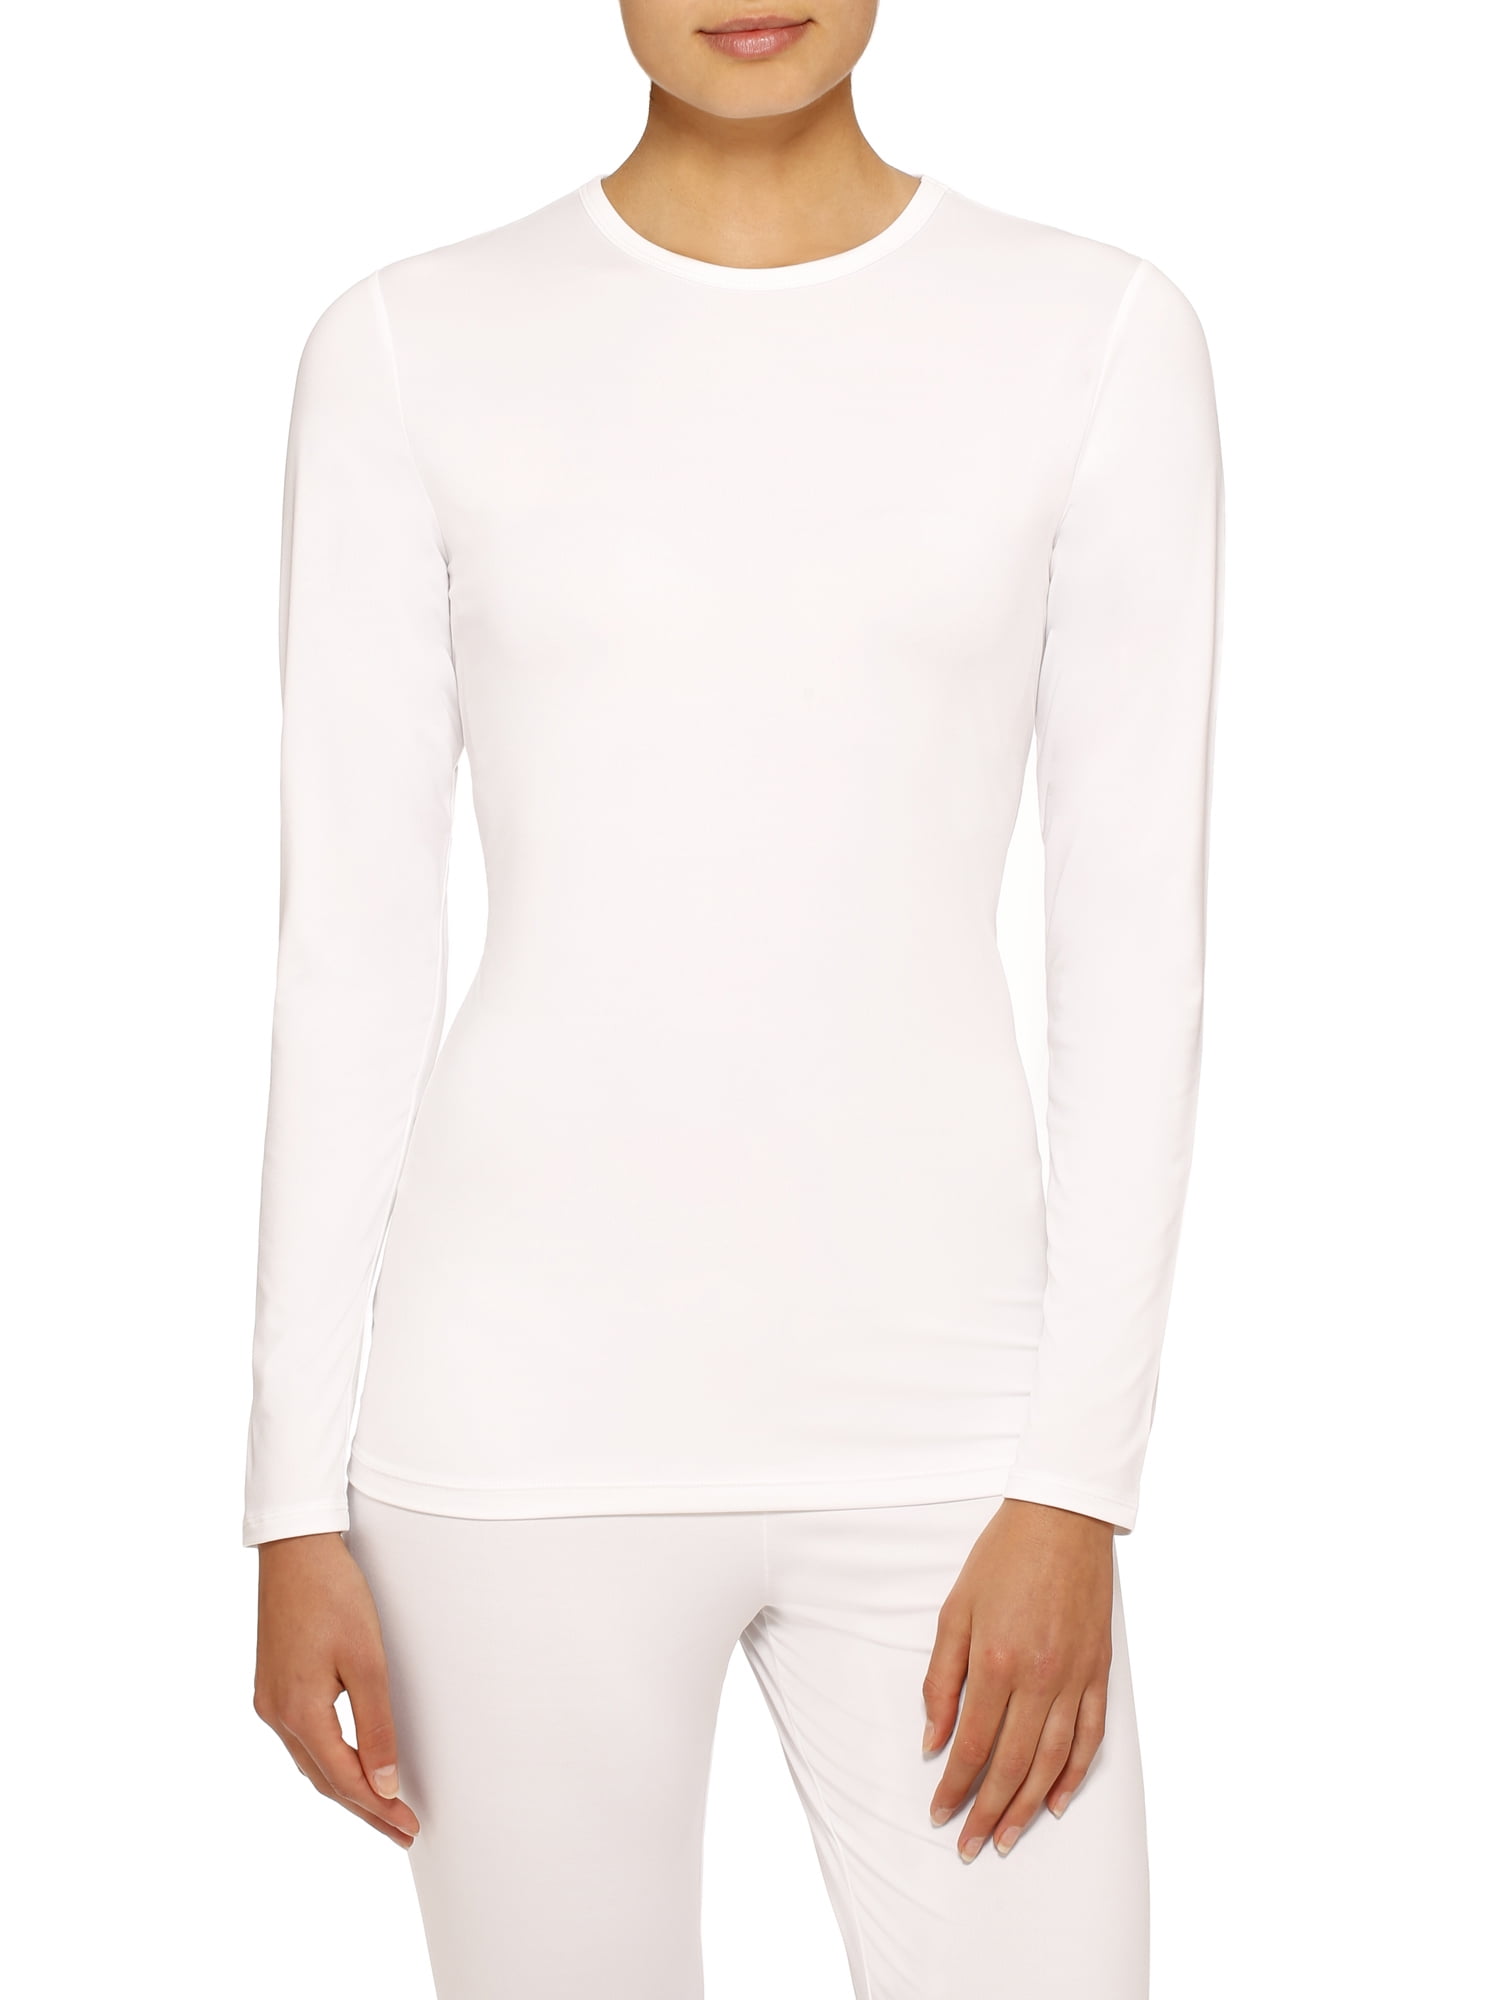 ClimateRight by Cuddl Duds Women's and Women's Plus Stretch Microfiber Base  Layer Long Sleeve Top